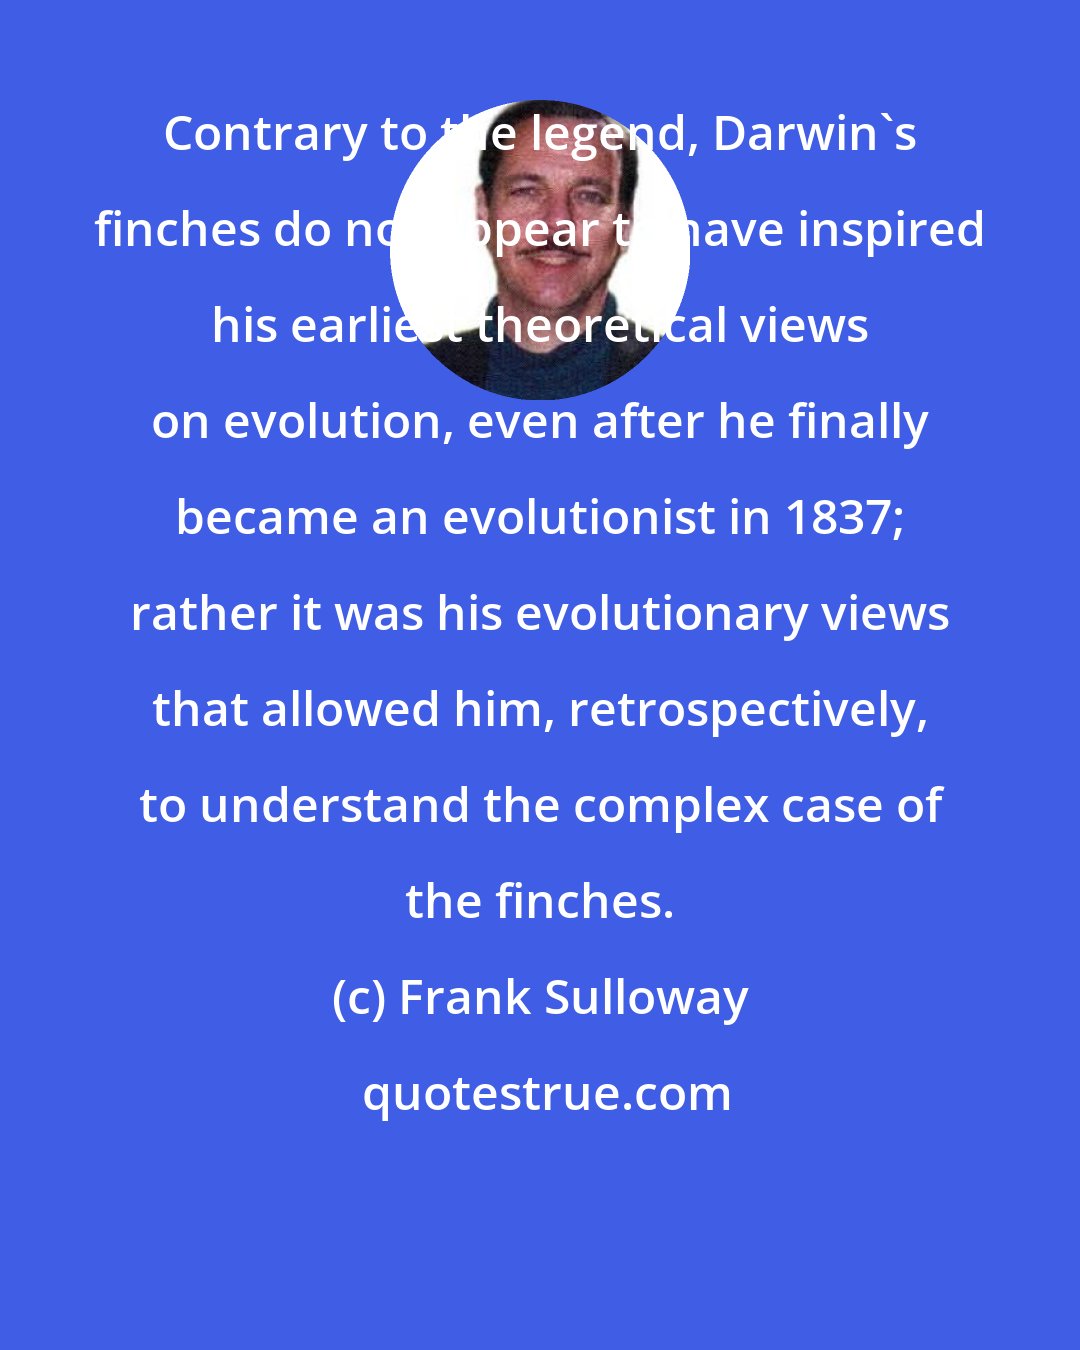 Frank Sulloway: Contrary to the legend, Darwin's finches do not appear to have inspired his earliest theoretical views on evolution, even after he finally became an evolutionist in 1837; rather it was his evolutionary views that allowed him, retrospectively, to understand the complex case of the finches.